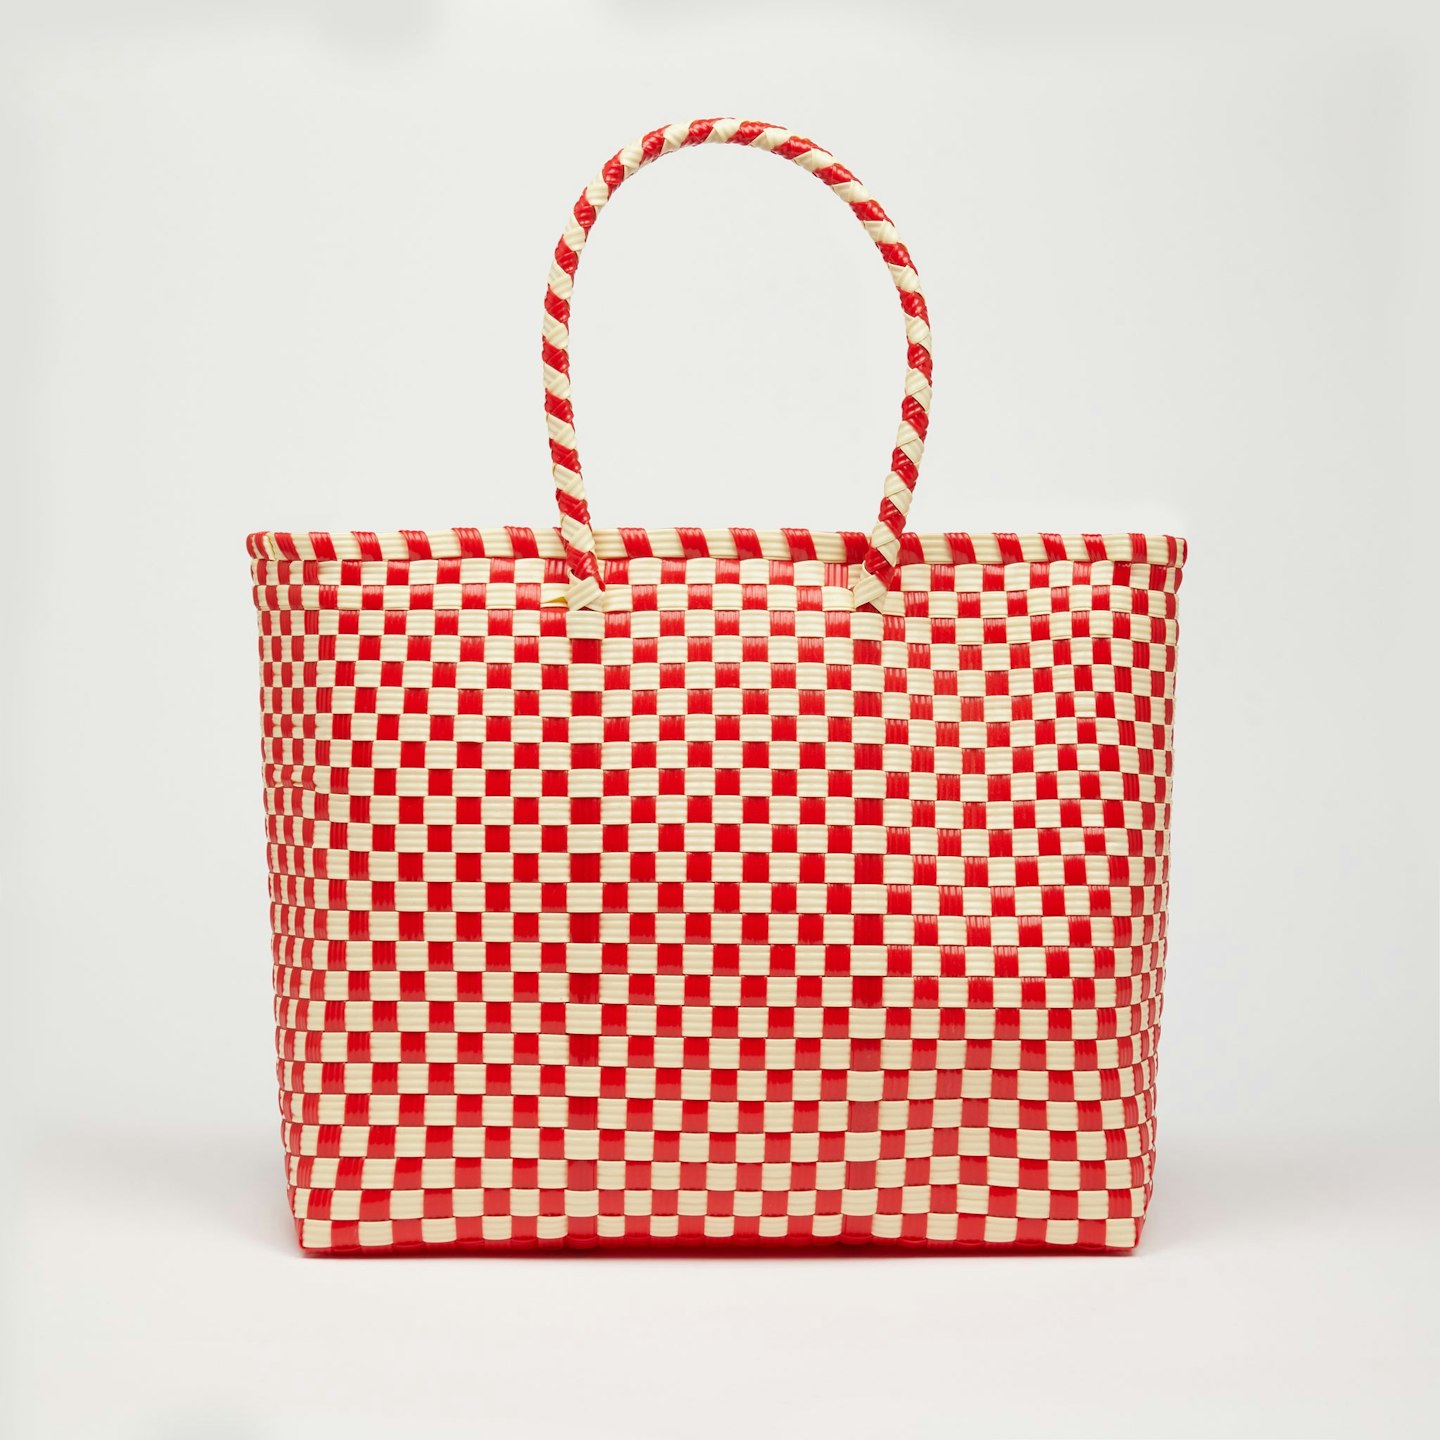 lunchtime shop Friday - Lalo The Shop, Large Woven Bag, £72